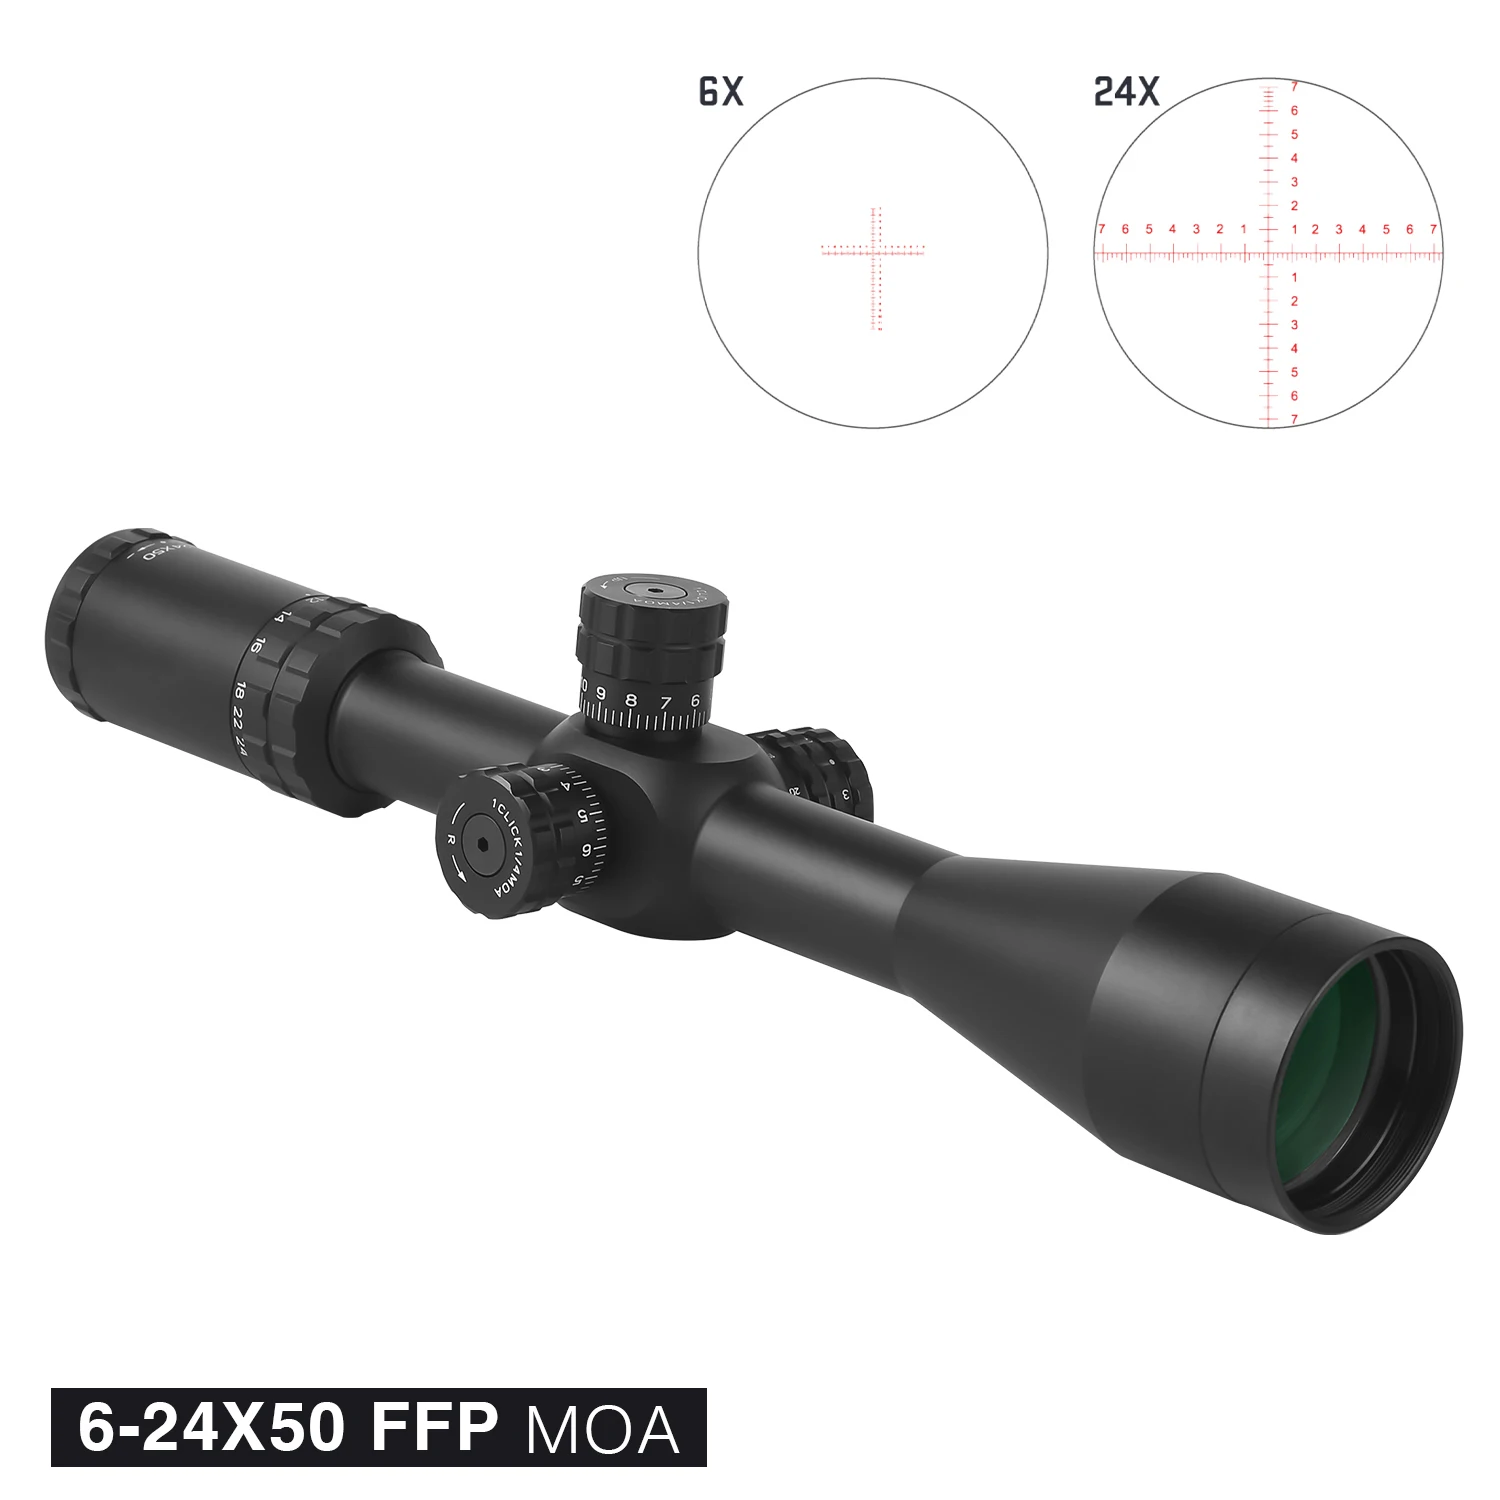 

BH 6-24x50 FFP MOA Tactical PCP Riflescopes Optical Sight Airsoft Airgun Scope Glass Etched Reticle with Light